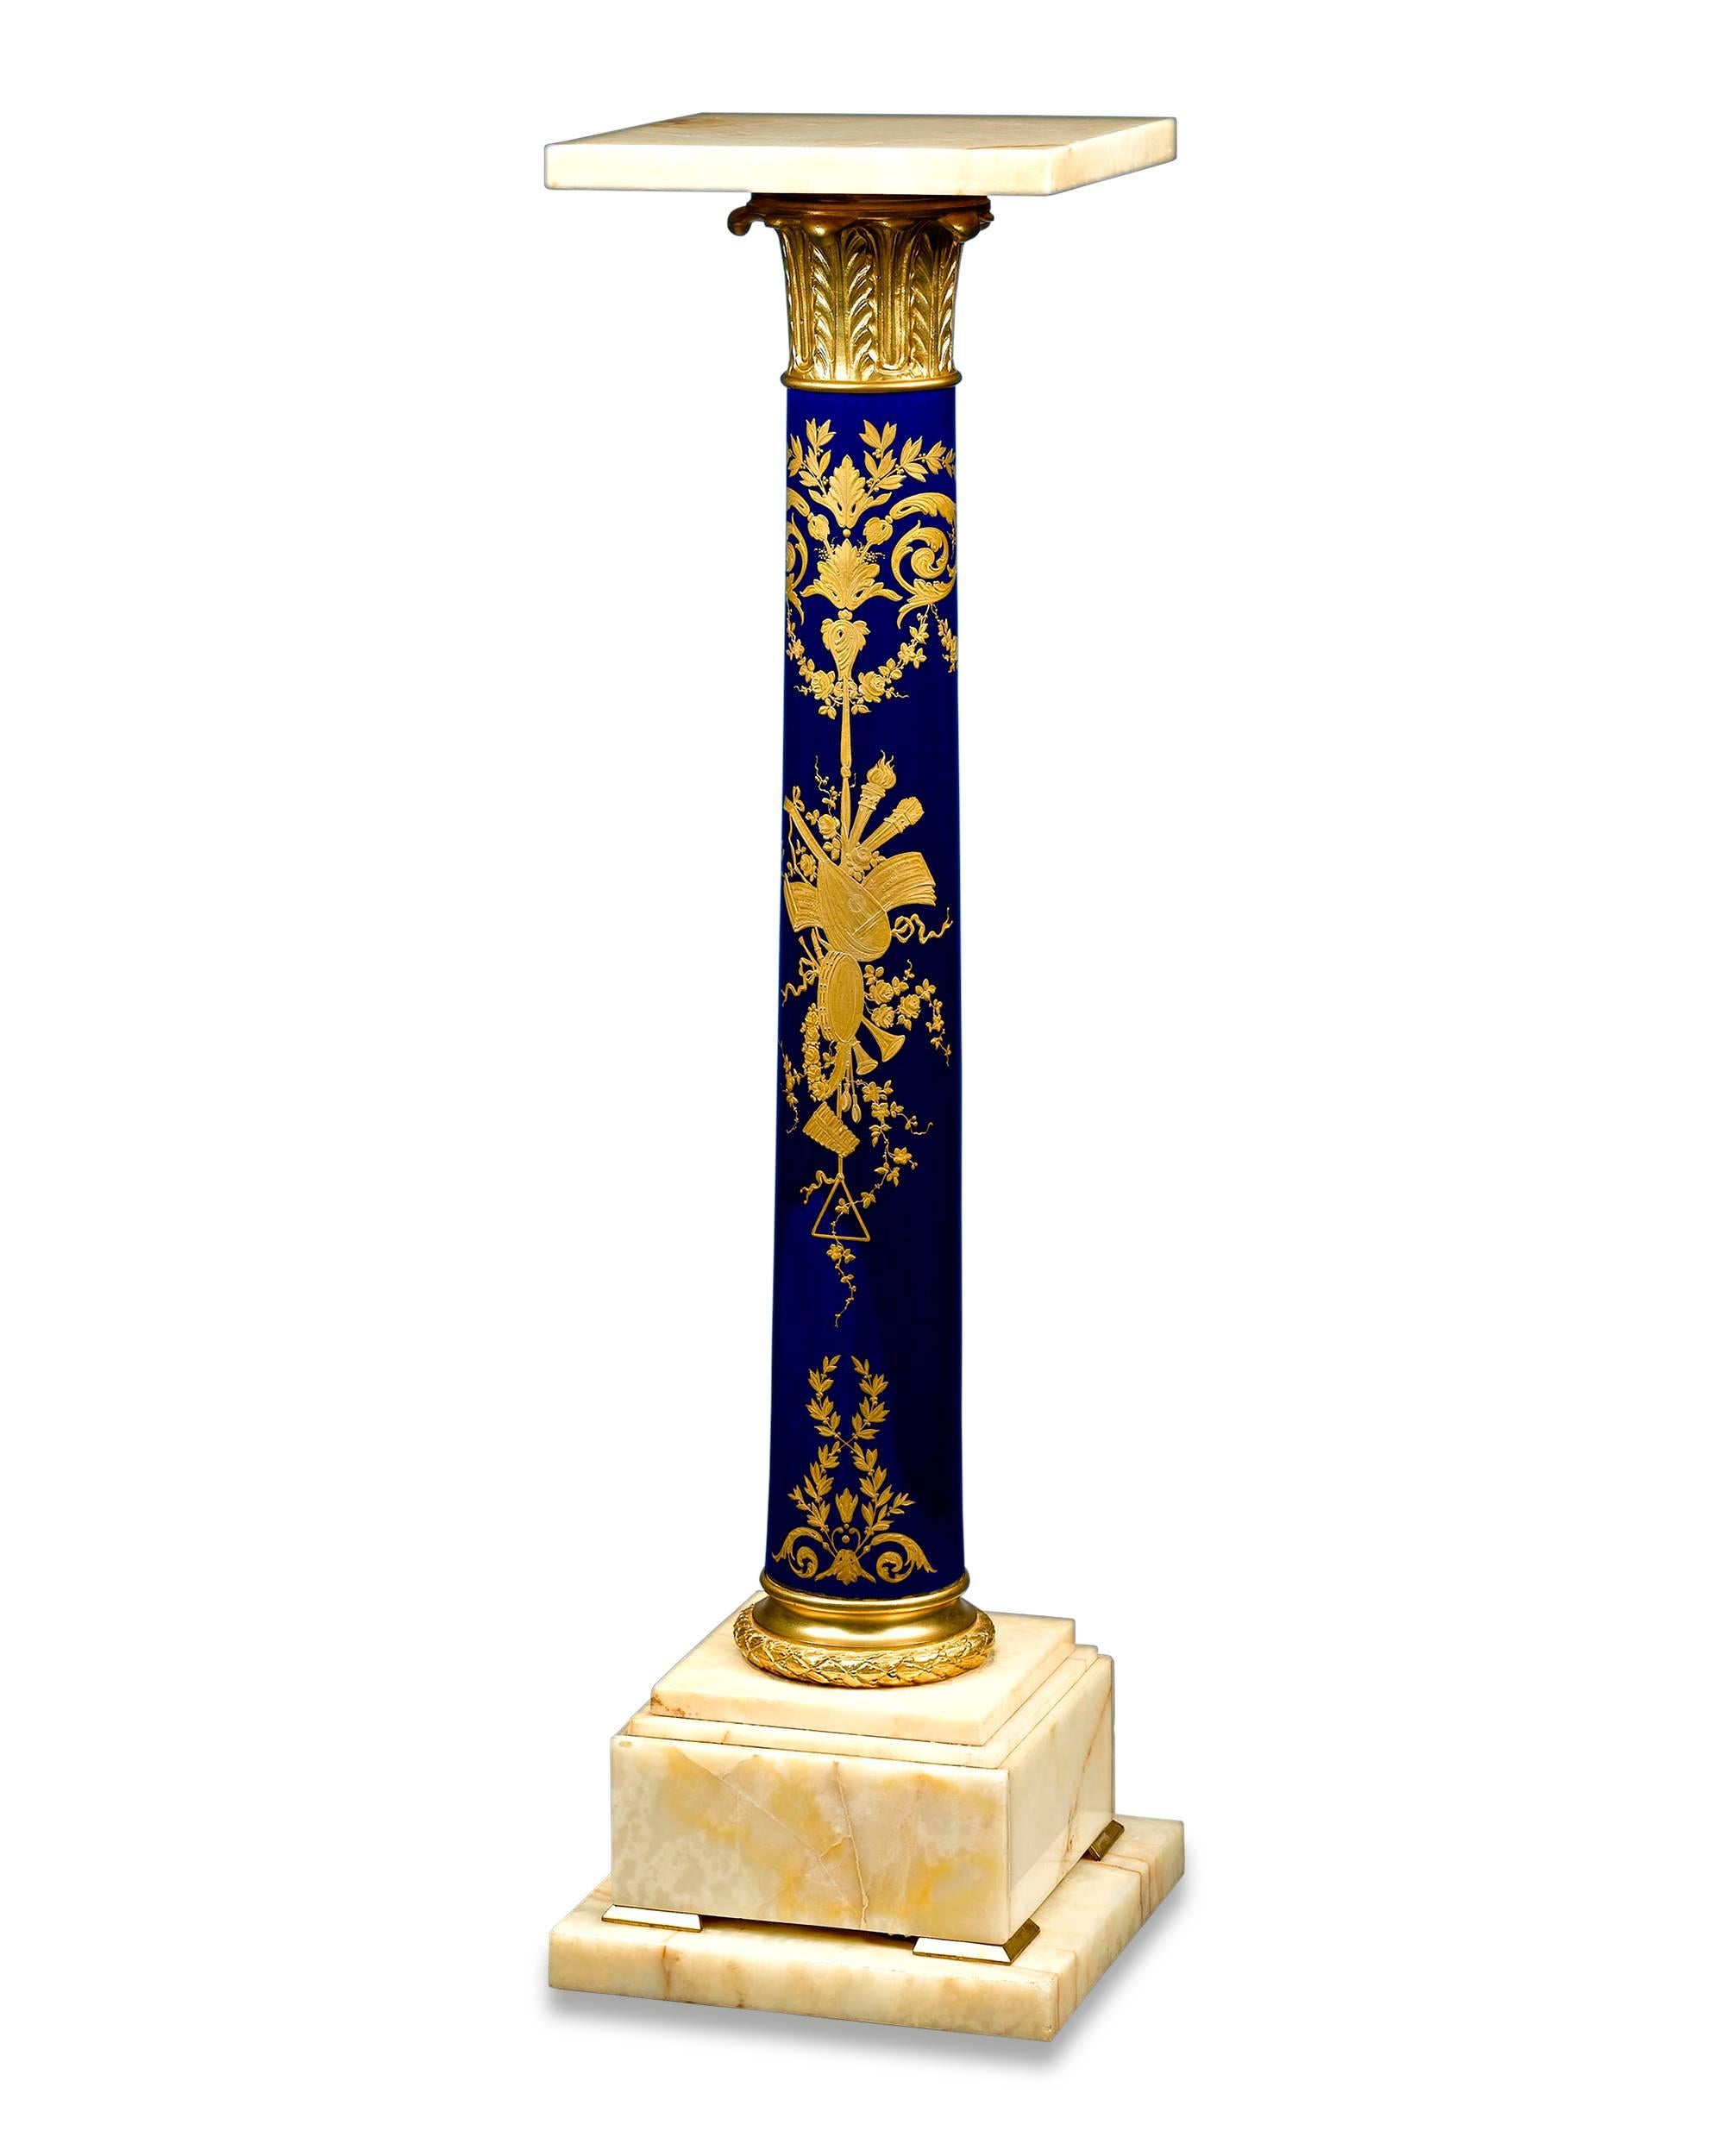 This outstanding pedestal beautifully exhibits the style and grace of the famed sèvres porcelain manufactory. This exceptional piece features a lustrous deep blue base, which provides the perfect background for the intricate gilt painting depicting